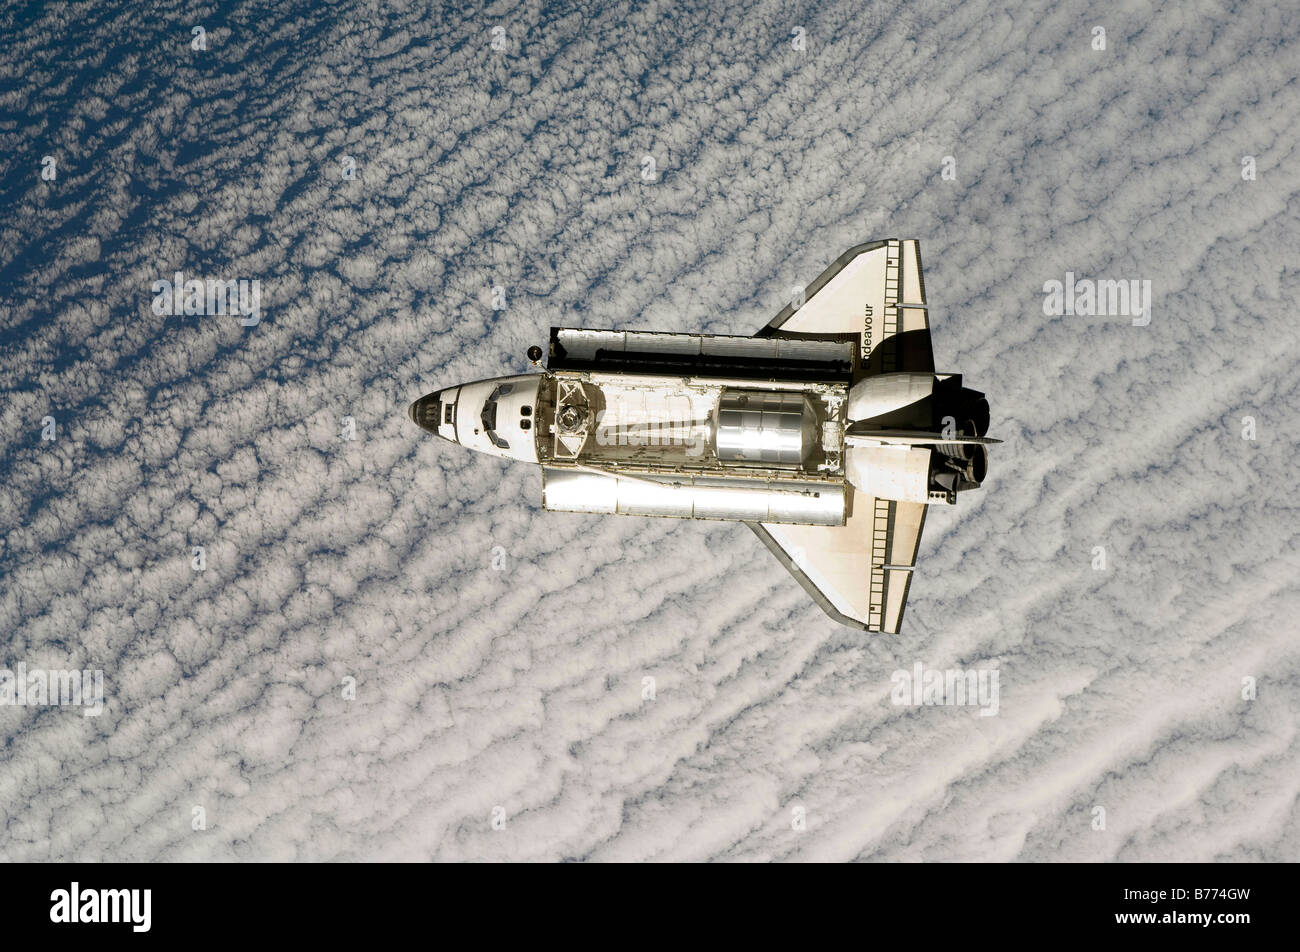 Space Shuttle Endeavour Stock Photo